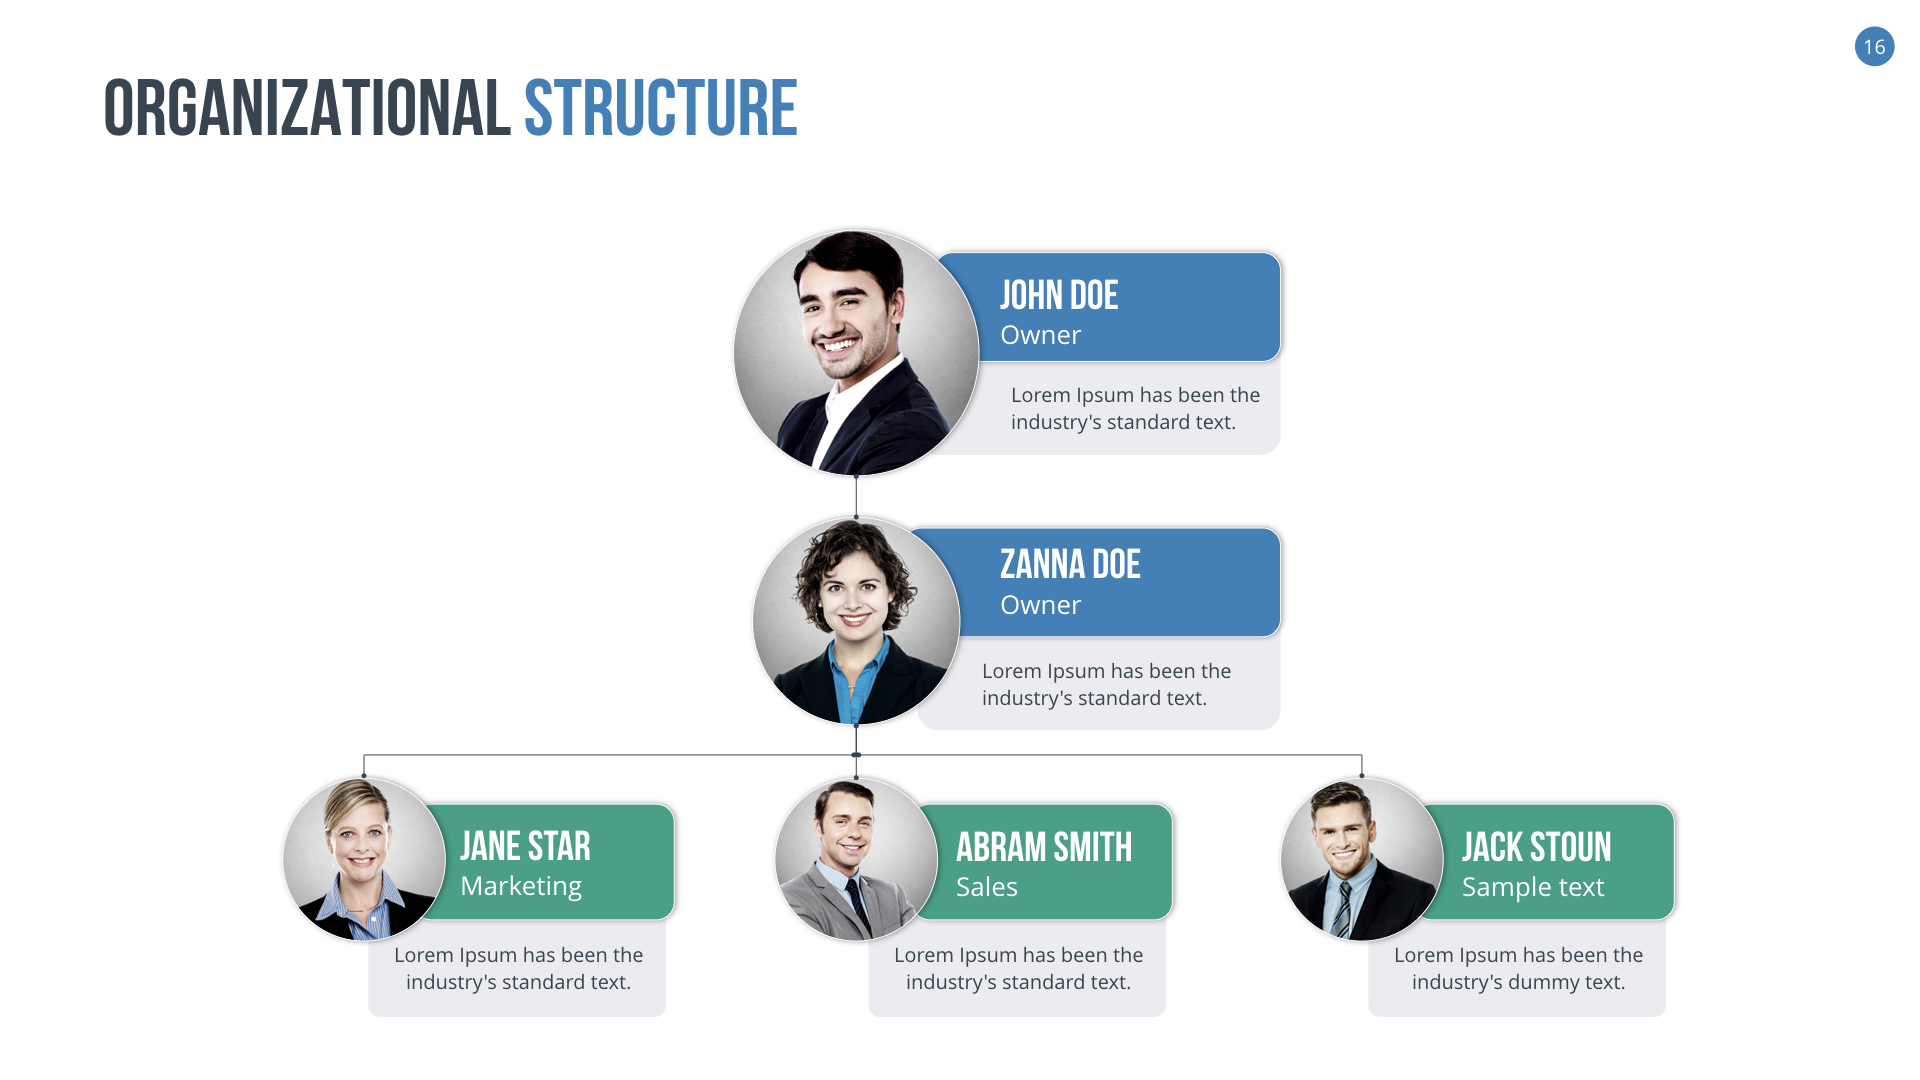 Organizational Chart and Hierarchy Keynote Template by SanaNik ...